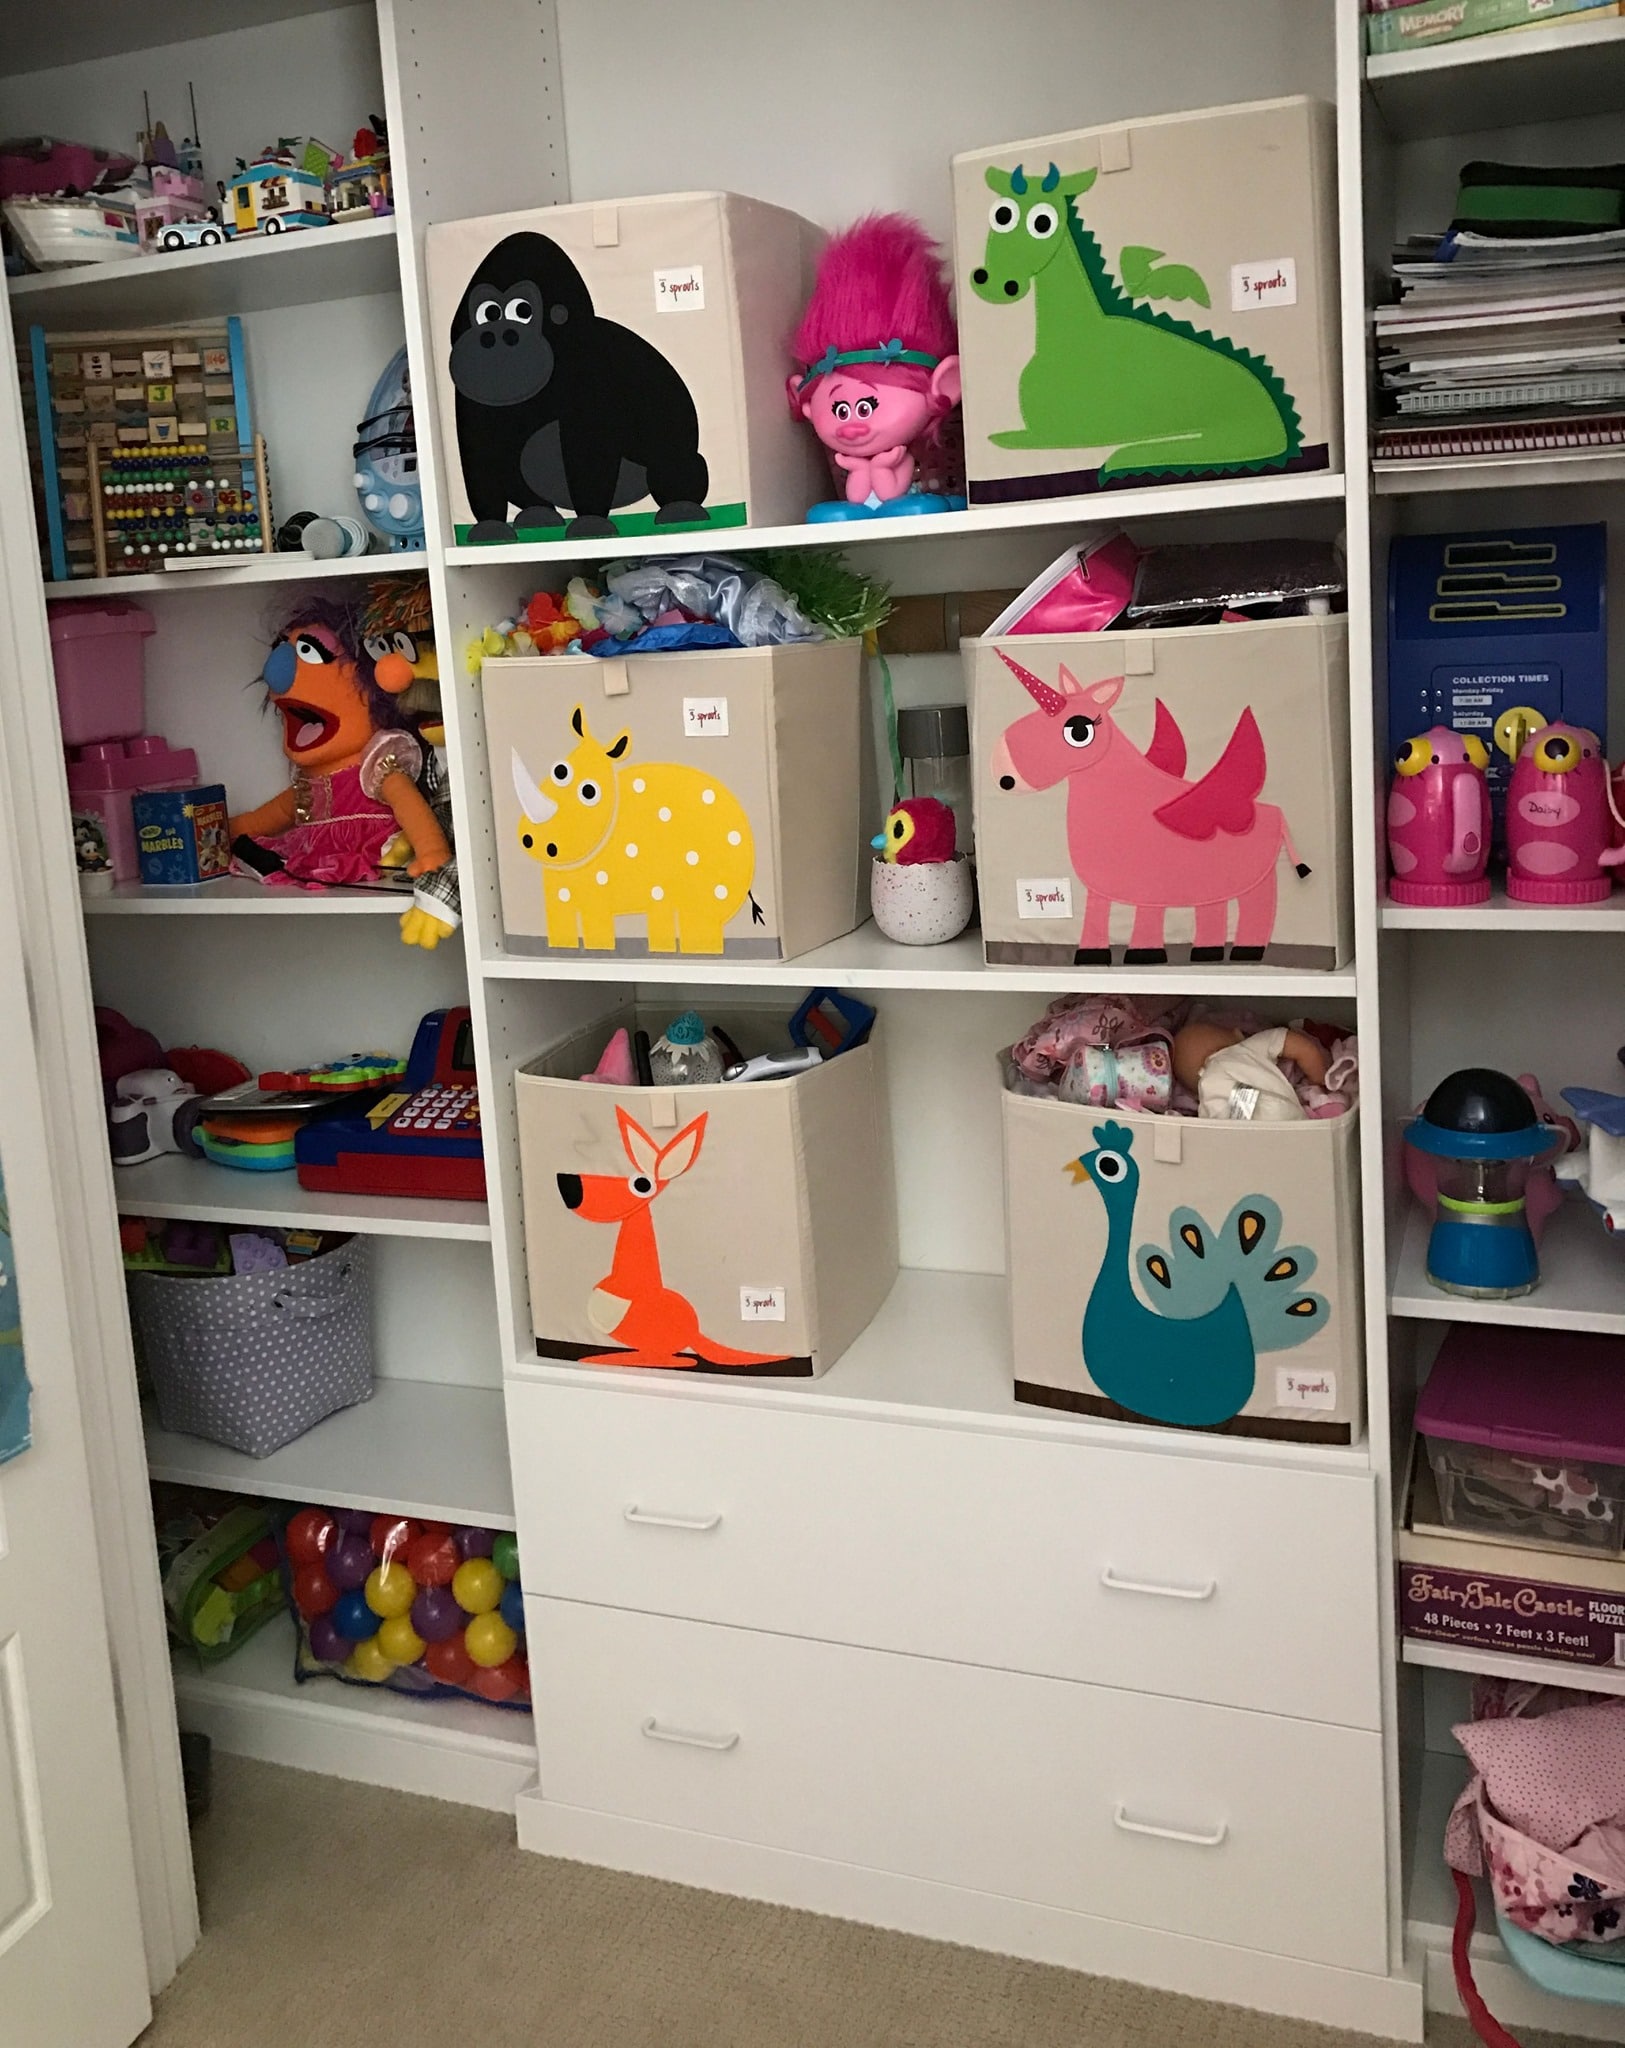 animals 5 ways to organize your child's room + make it fabulous